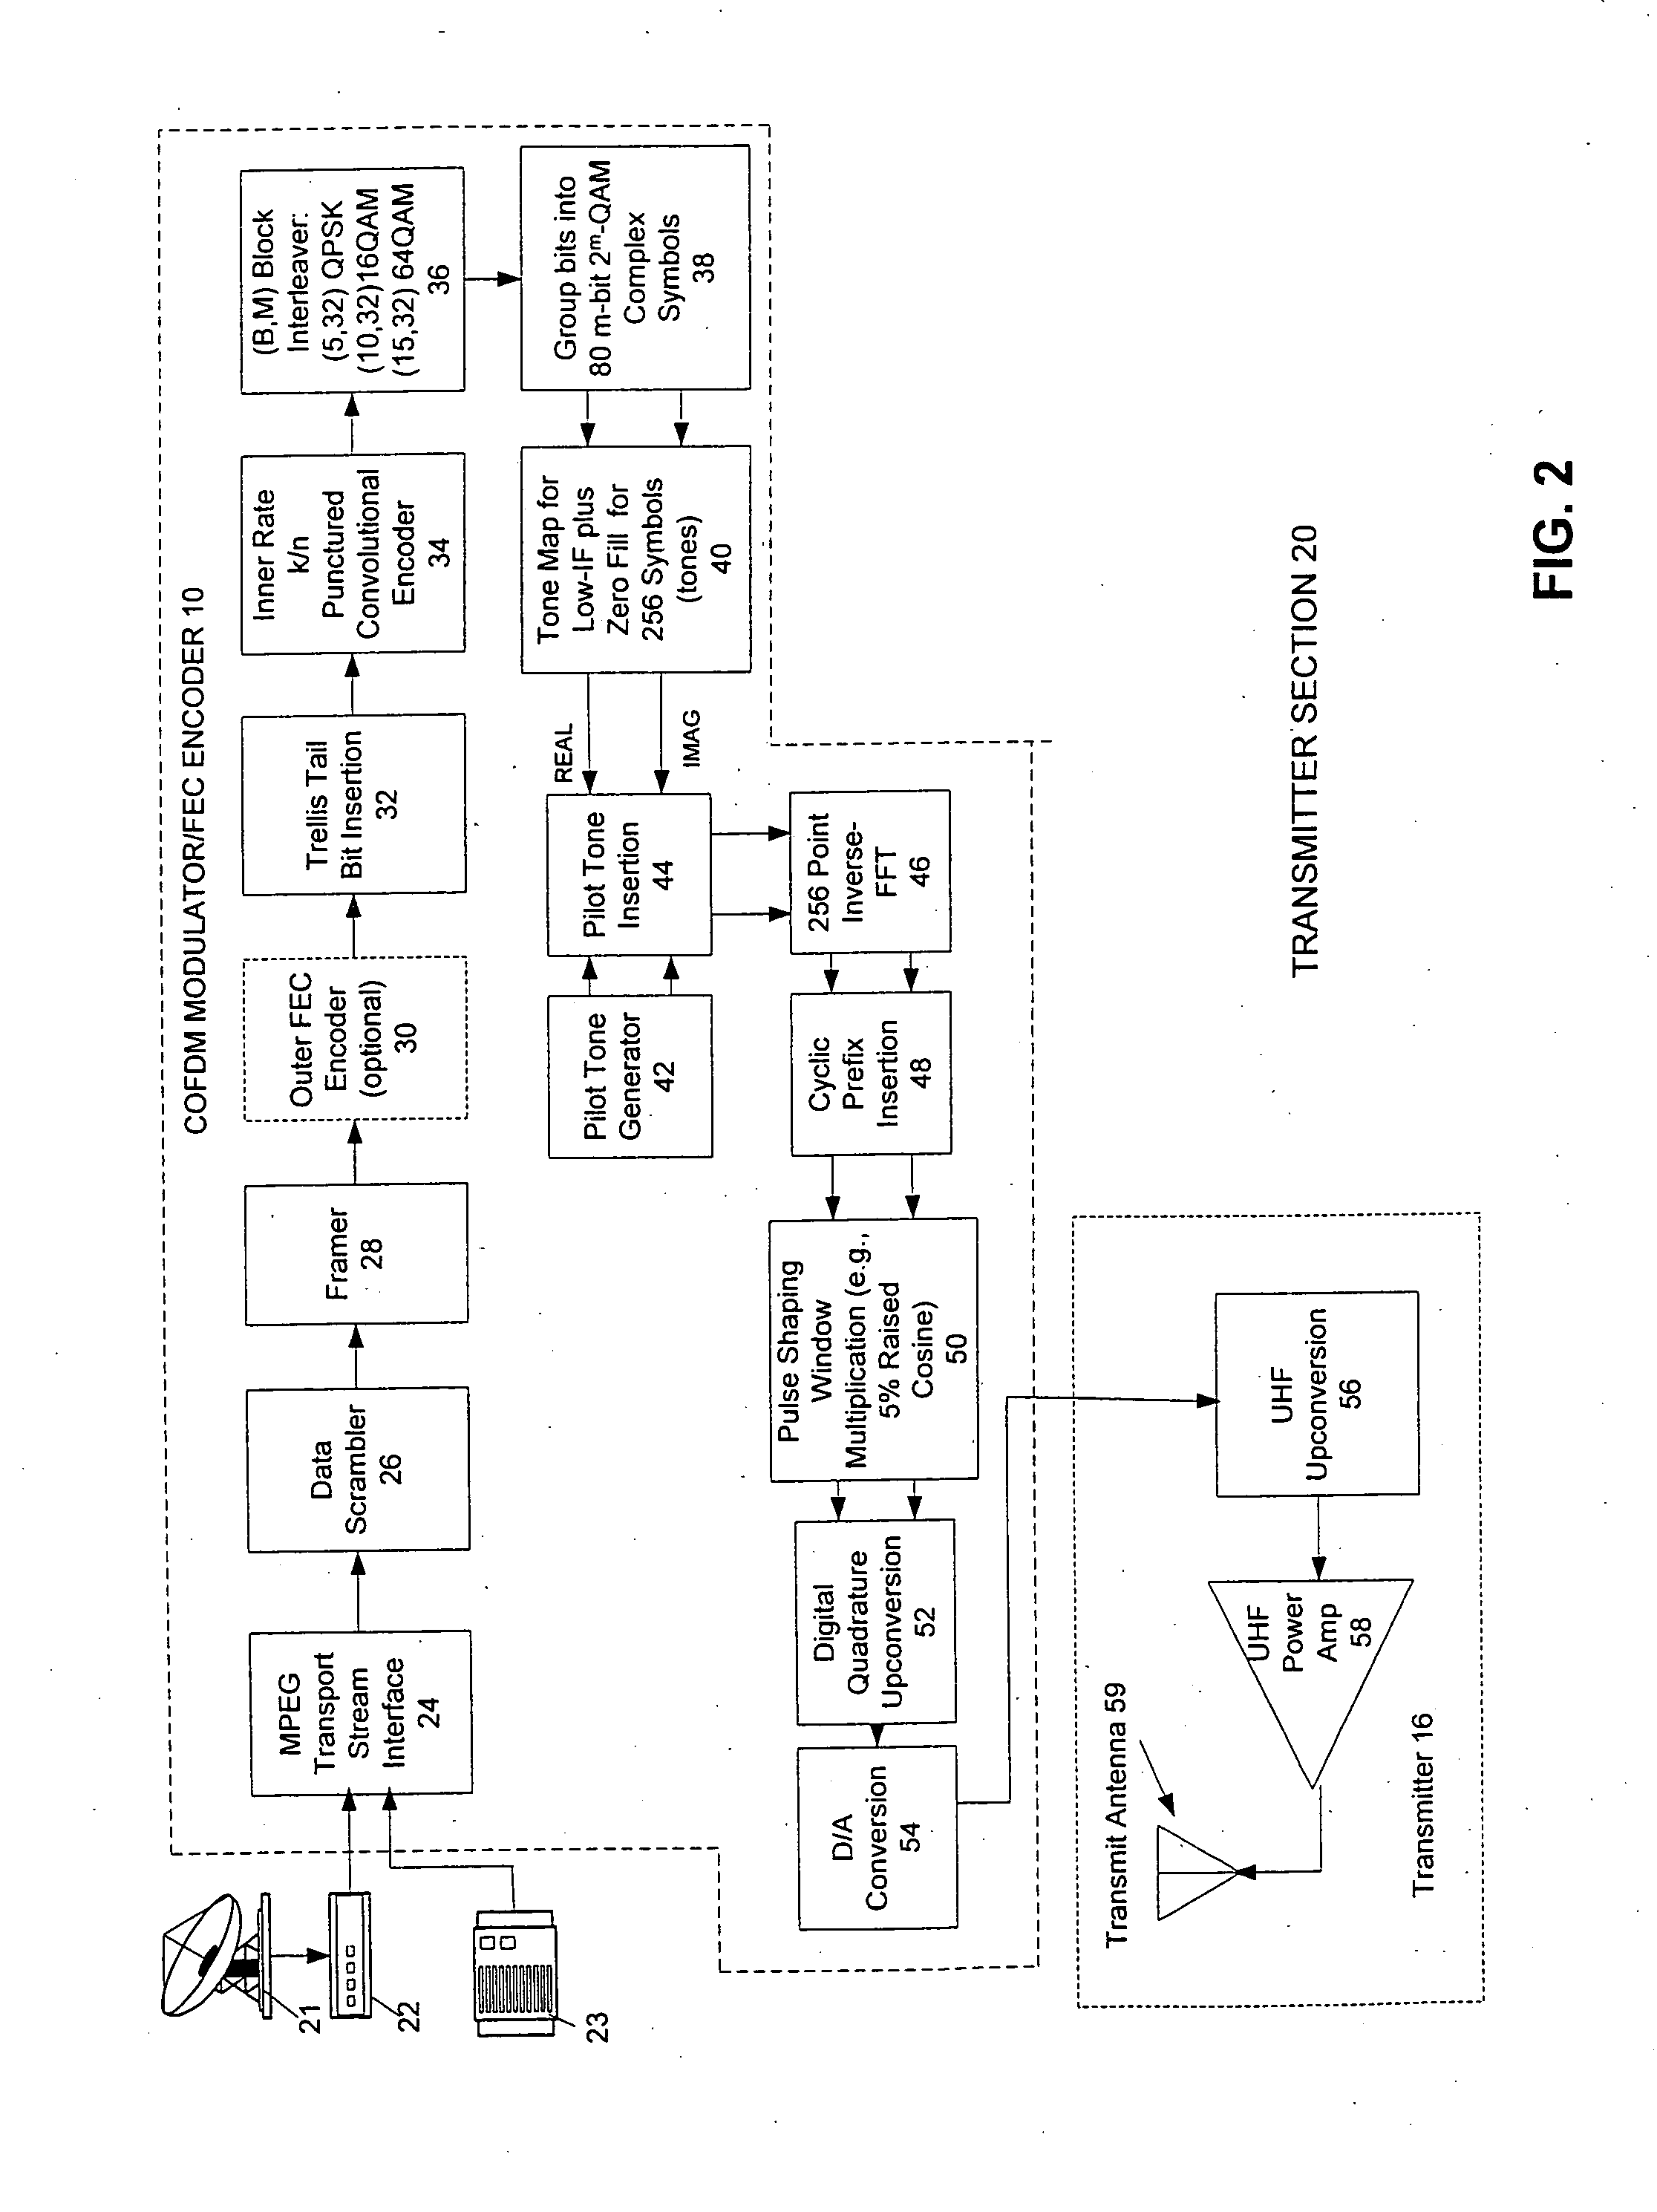 Methods, apparatus and systems for terrestrial wireless broadcast of digital data to stationary receivers